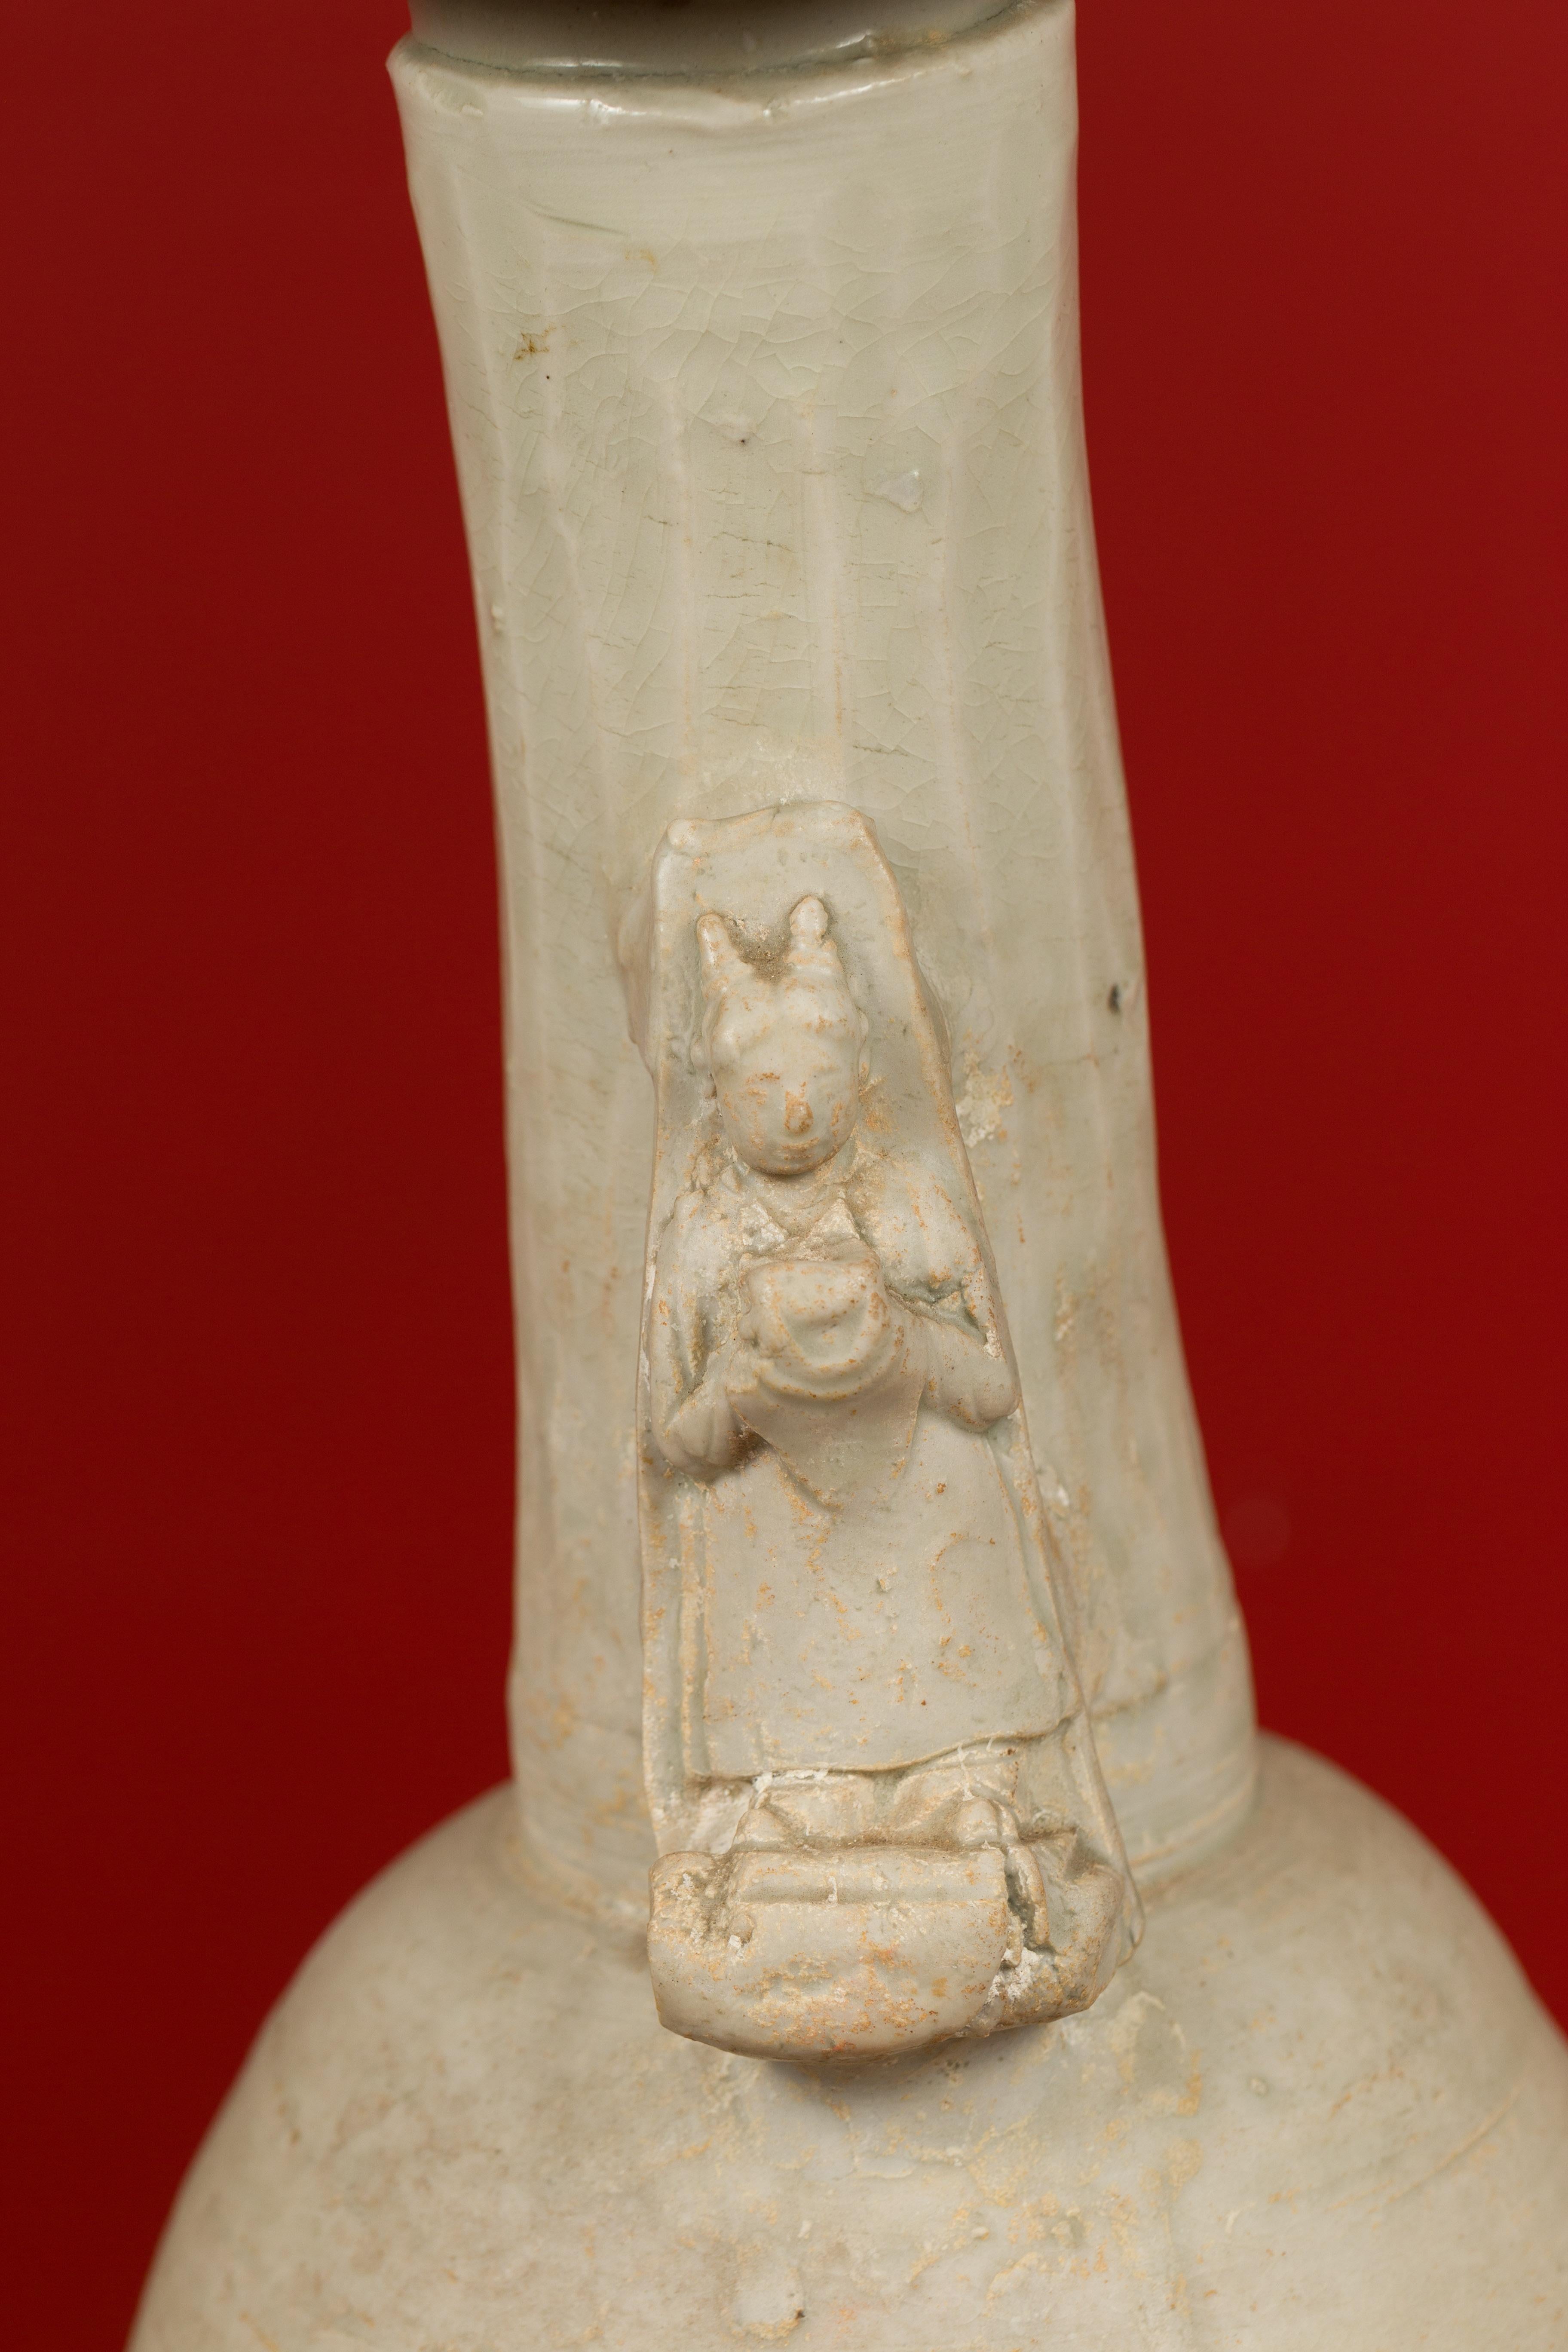 18th Century and Earlier Chinese Song Dynasty Glazed Porcelain Funerary Vase with Ritual Attendant